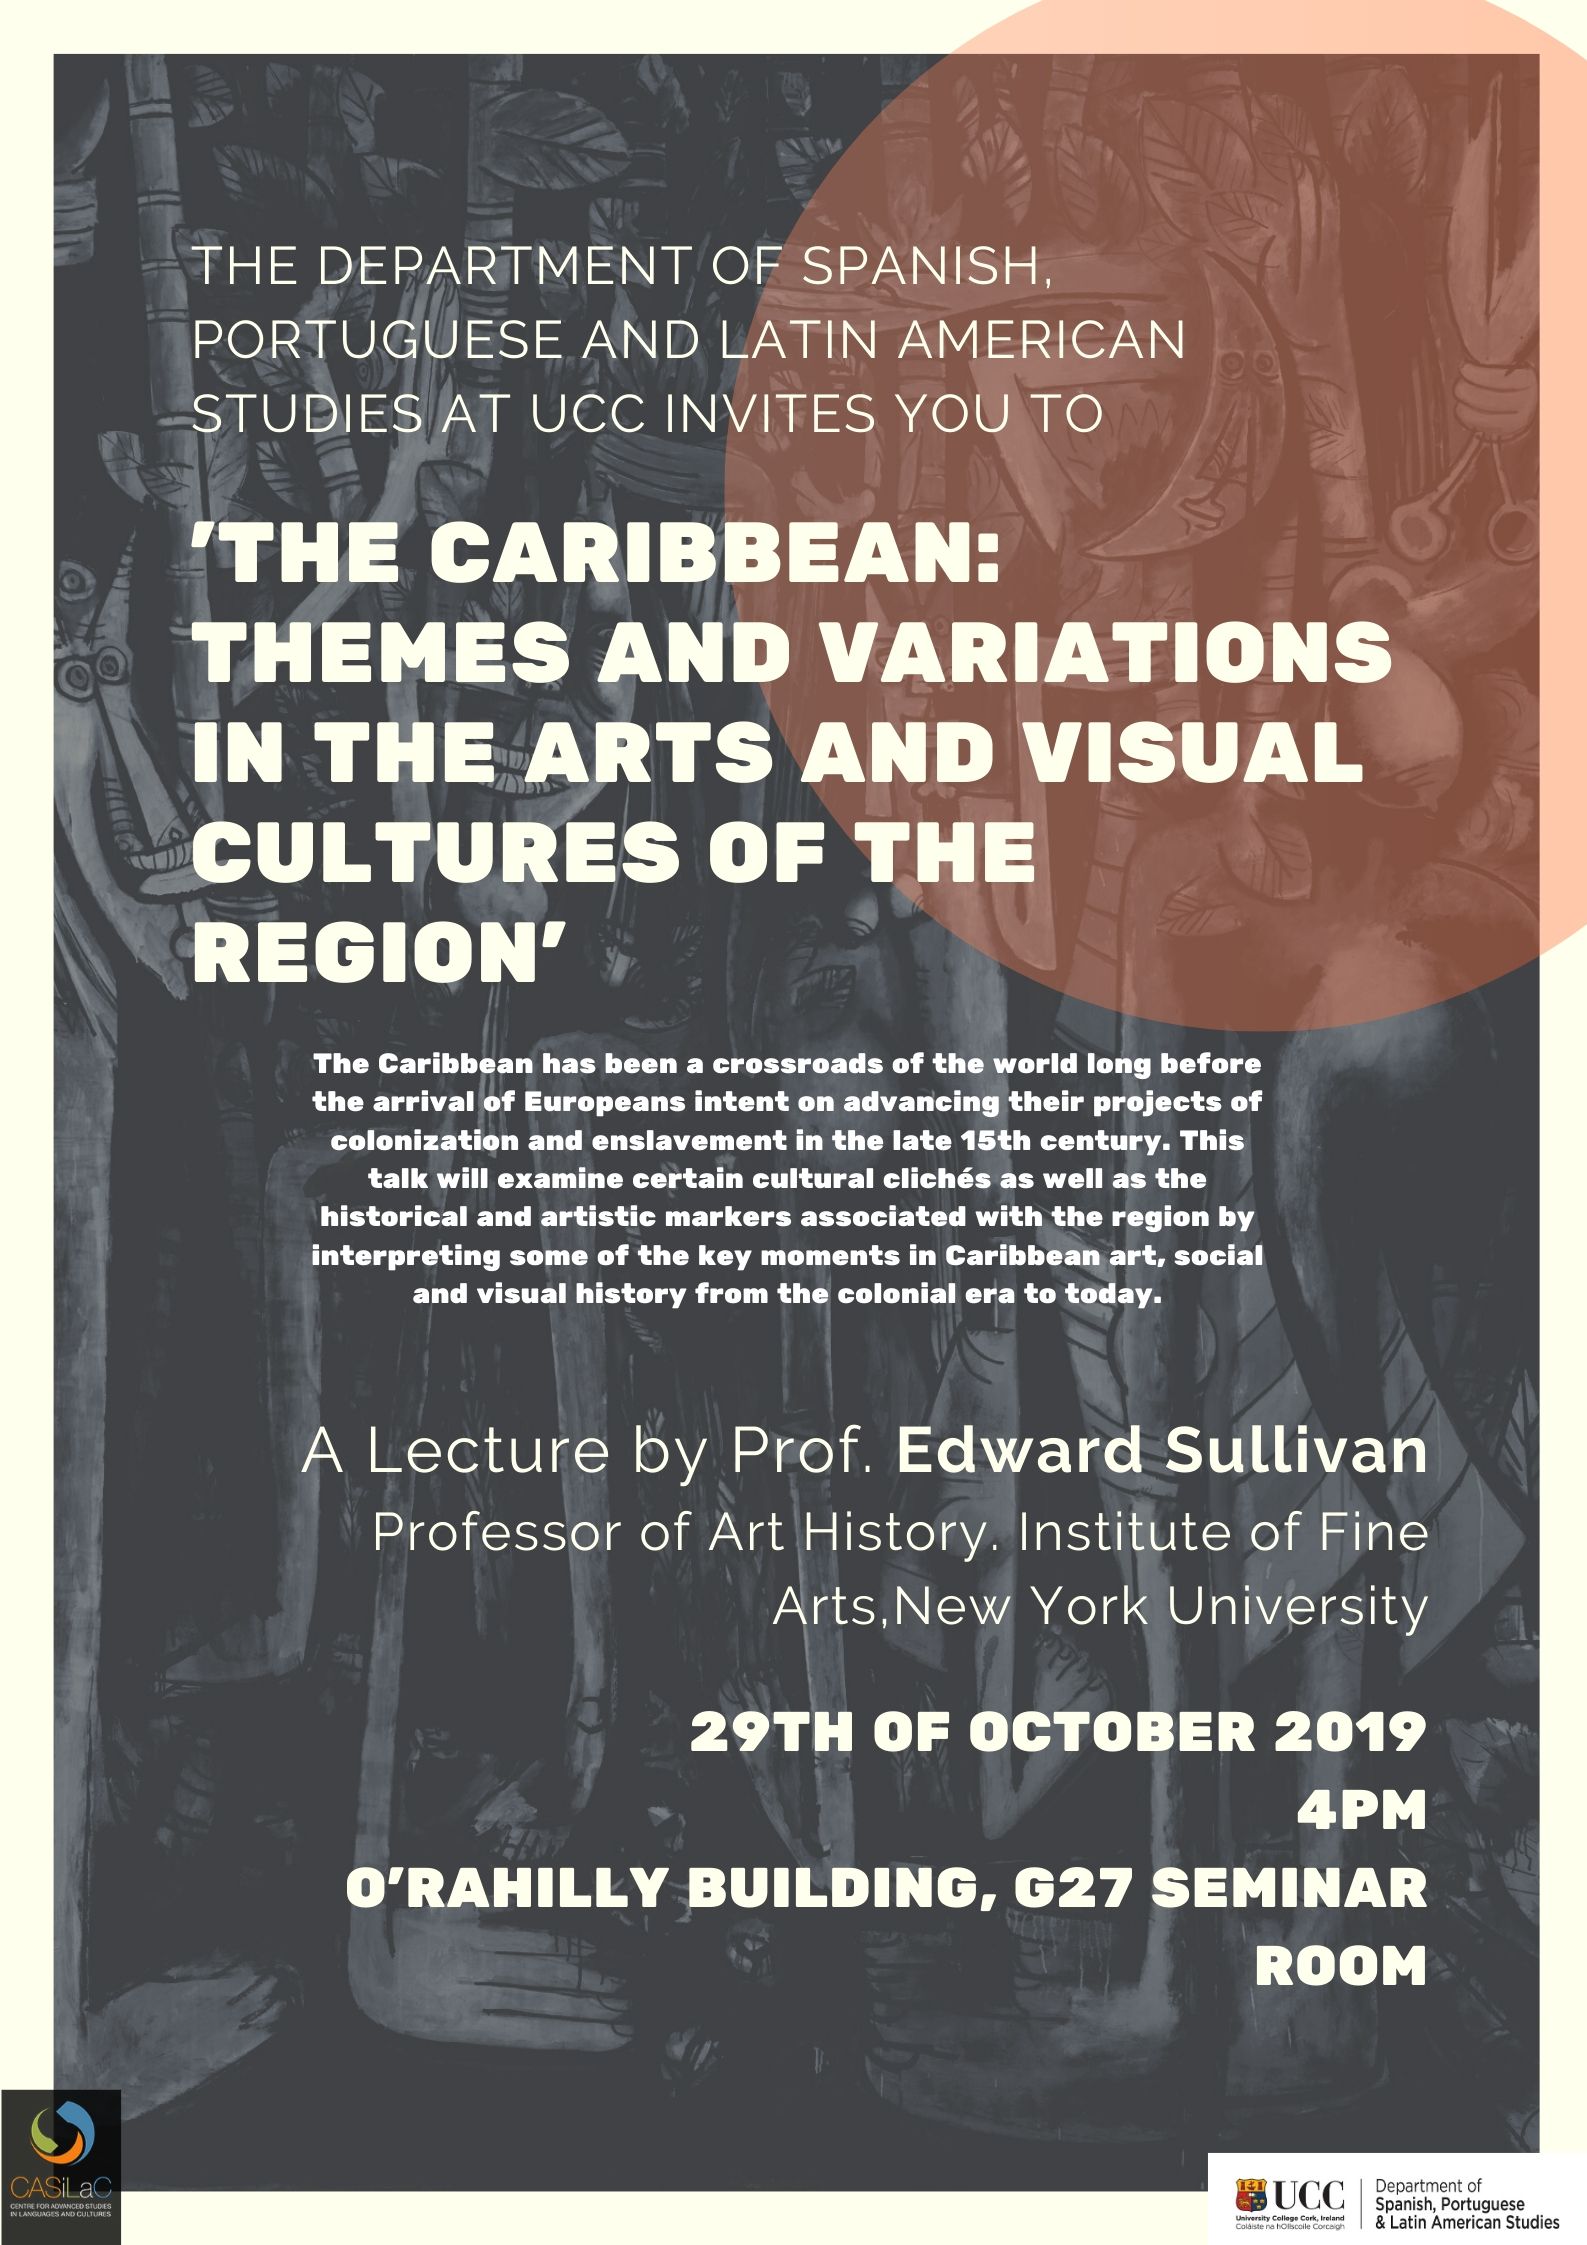 The Caribbean: Themes and Variations in the Arts and Visual Cultures of the Region. 